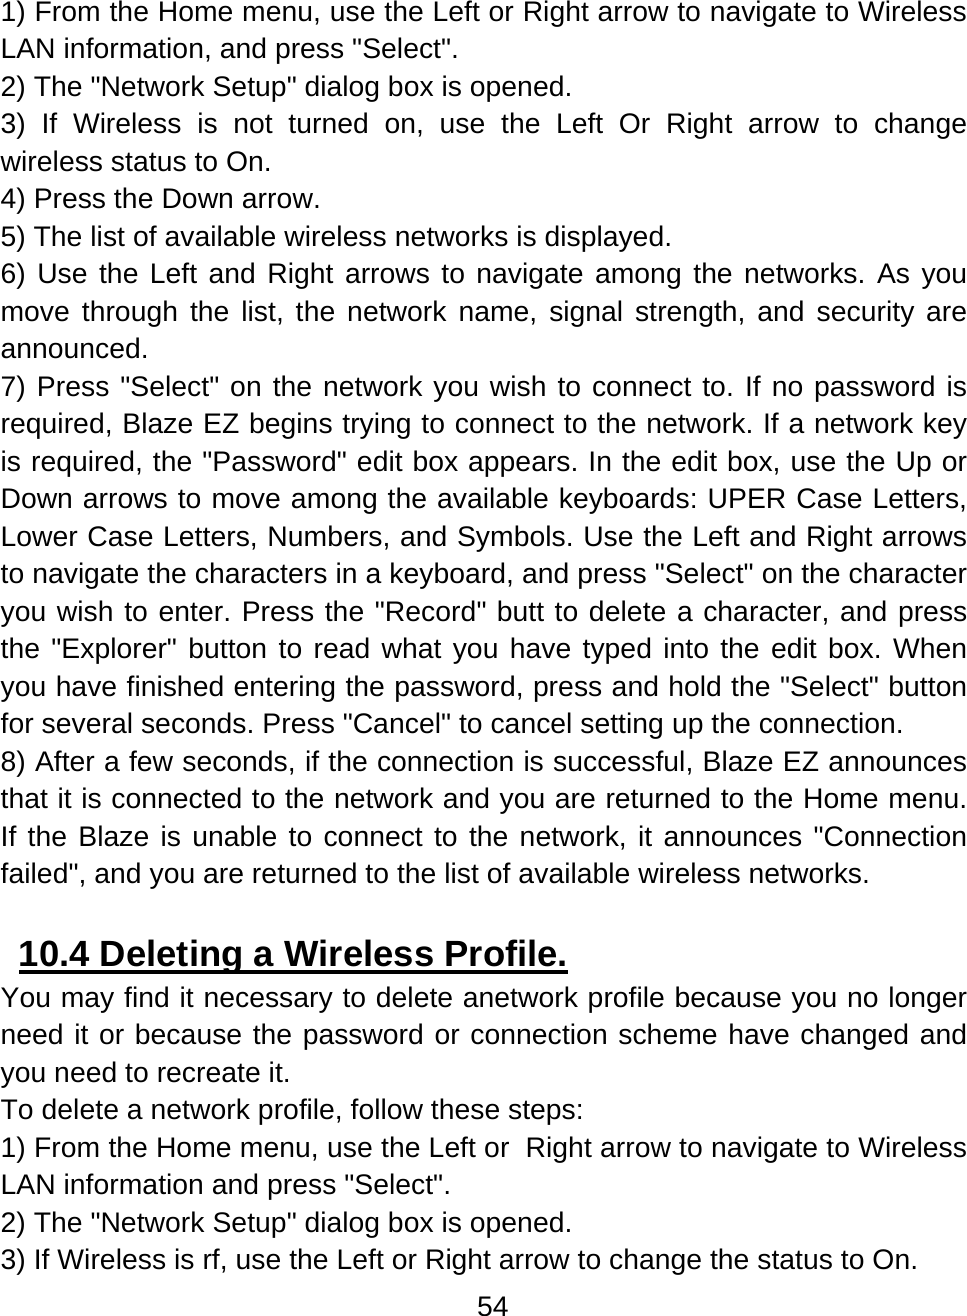 54  1) From the Home menu, use the Left or Right arrow to navigate to Wireless LAN information, and press &quot;Select&quot;. 2) The &quot;Network Setup&quot; dialog box is opened. 3) If Wireless is not turned on, use the Left Or Right arrow to change wireless status to On. 4) Press the Down arrow. 5) The list of available wireless networks is displayed. 6) Use the Left and Right arrows to navigate among the networks. As you move through the list, the network name, signal strength, and security are announced. 7) Press &quot;Select&quot; on the network you wish to connect to. If no password is required, Blaze EZ begins trying to connect to the network. If a network key is required, the &quot;Password&quot; edit box appears. In the edit box, use the Up or Down arrows to move among the available keyboards: UPER Case Letters, Lower Case Letters, Numbers, and Symbols. Use the Left and Right arrows to navigate the characters in a keyboard, and press &quot;Select&quot; on the character you wish to enter. Press the &quot;Record&quot; butt to delete a character, and press the &quot;Explorer&quot; button to read what you have typed into the edit box. When you have finished entering the password, press and hold the &quot;Select&quot; button for several seconds. Press &quot;Cancel&quot; to cancel setting up the connection. 8) After a few seconds, if the connection is successful, Blaze EZ announces that it is connected to the network and you are returned to the Home menu. If the Blaze is unable to connect to the network, it announces &quot;Connection failed&quot;, and you are returned to the list of available wireless networks.       10.4 Deleting a Wireless Profile.  You may find it necessary to delete anetwork profile because you no longer need it or because the password or connection scheme have changed and you need to recreate it. To delete a network profile, follow these steps: 1) From the Home menu, use the Left or  Right arrow to navigate to Wireless LAN information and press &quot;Select&quot;. 2) The &quot;Network Setup&quot; dialog box is opened. 3) If Wireless is rf, use the Left or Right arrow to change the status to On. 